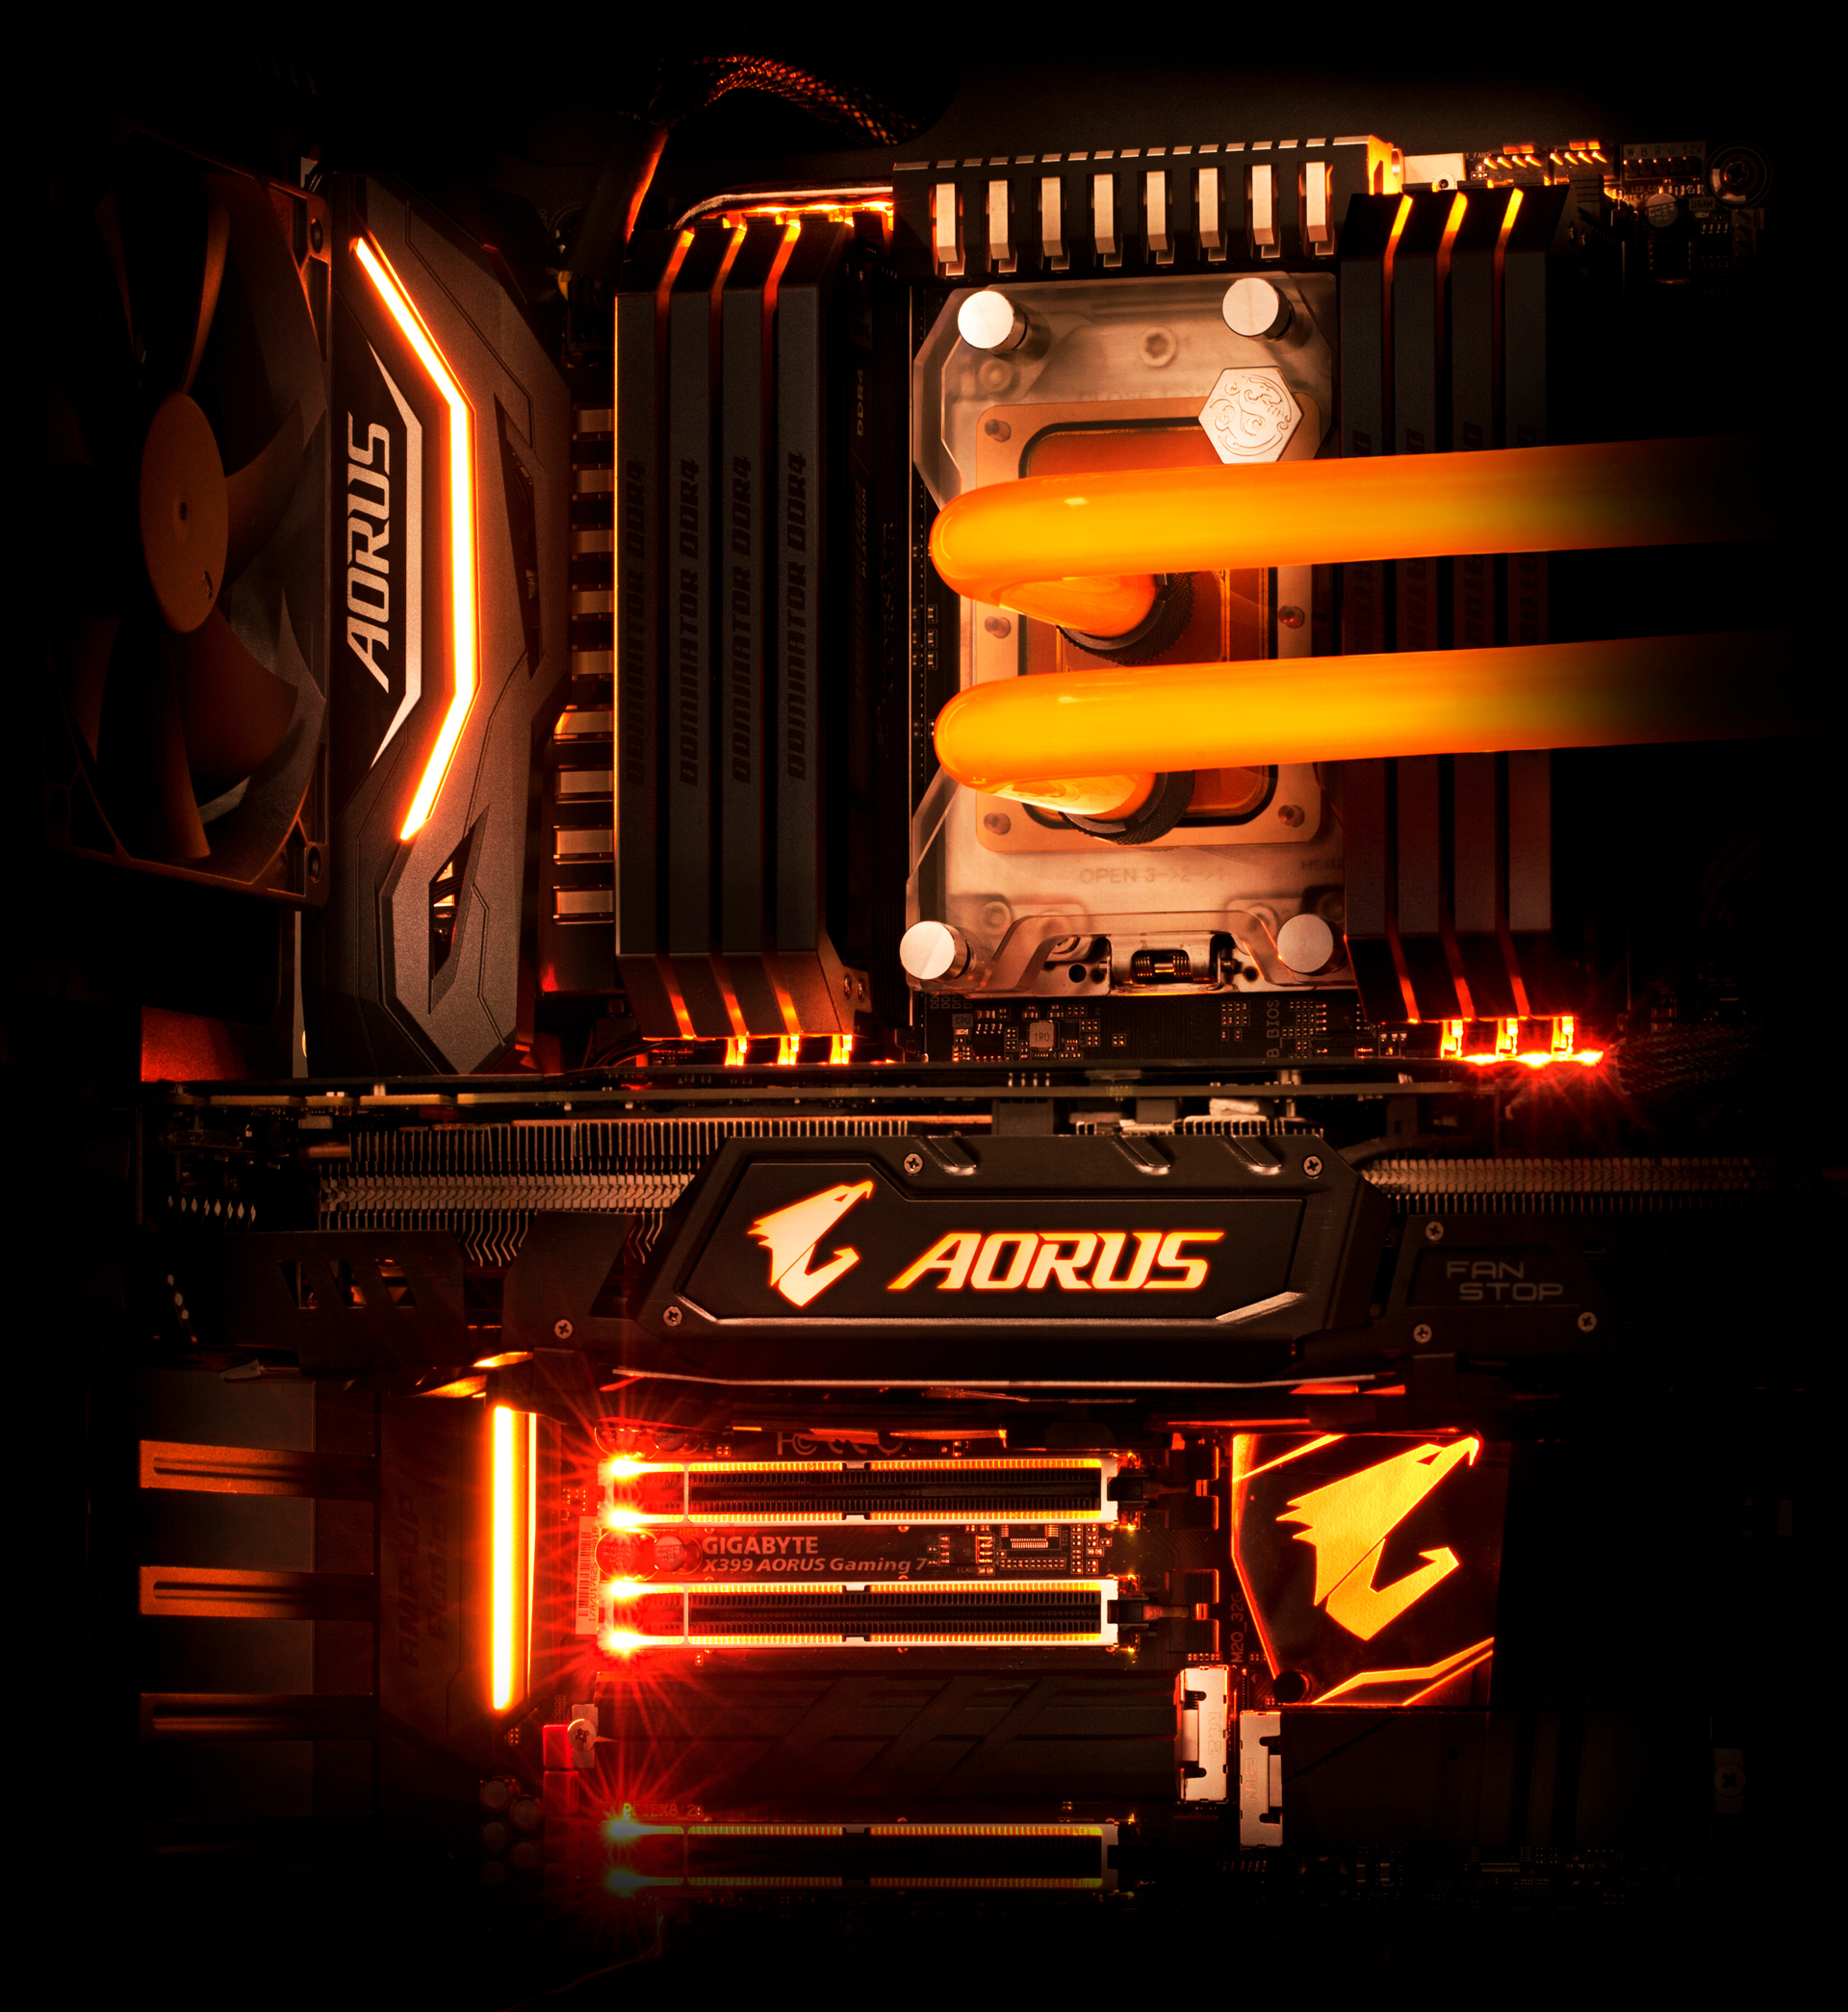 General 1920x2090 Gigabyte Aorus motherboards computer PC gaming technology